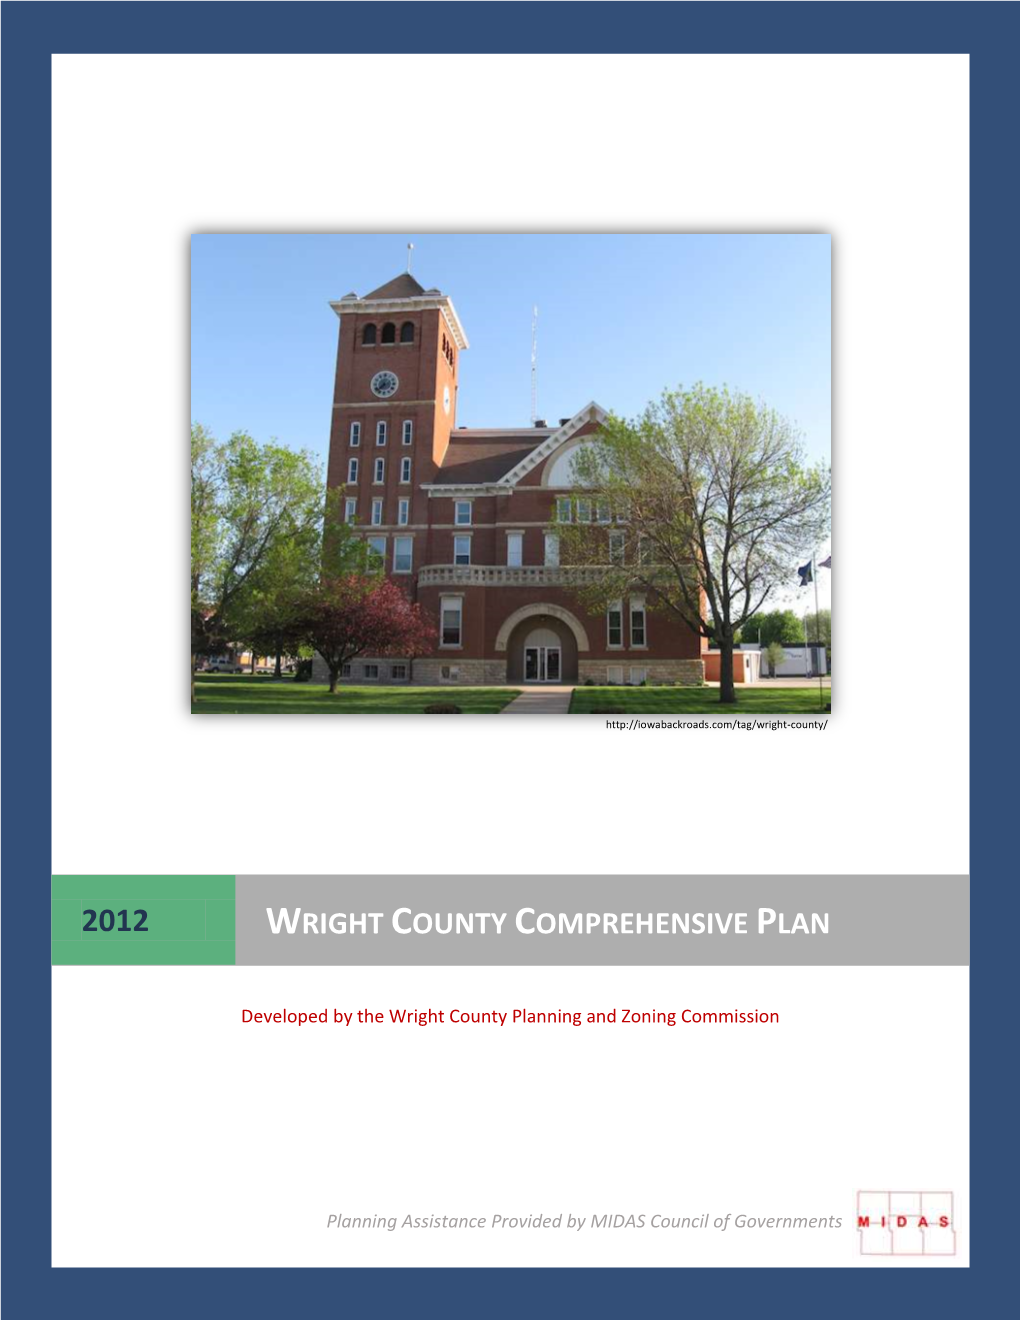 Wright County Comprehensive Plan